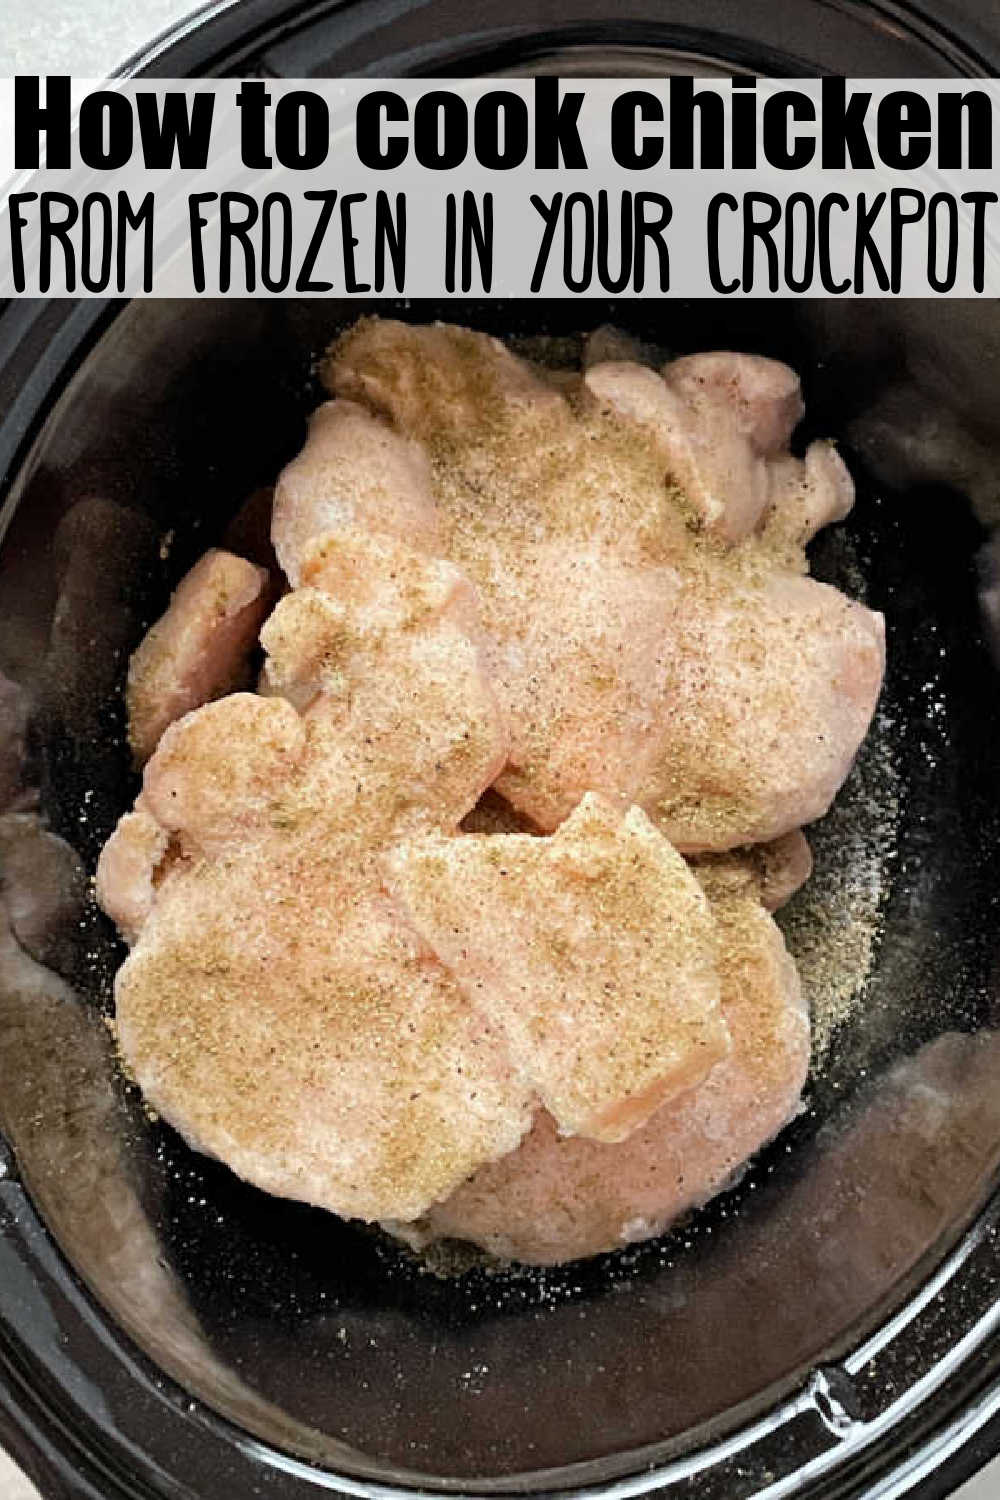 Learn how to make frozen, boneless and skinless chicken breasts in the Crock Pot for using in any recipe calling for cooked chicken. via @foodtasticmom